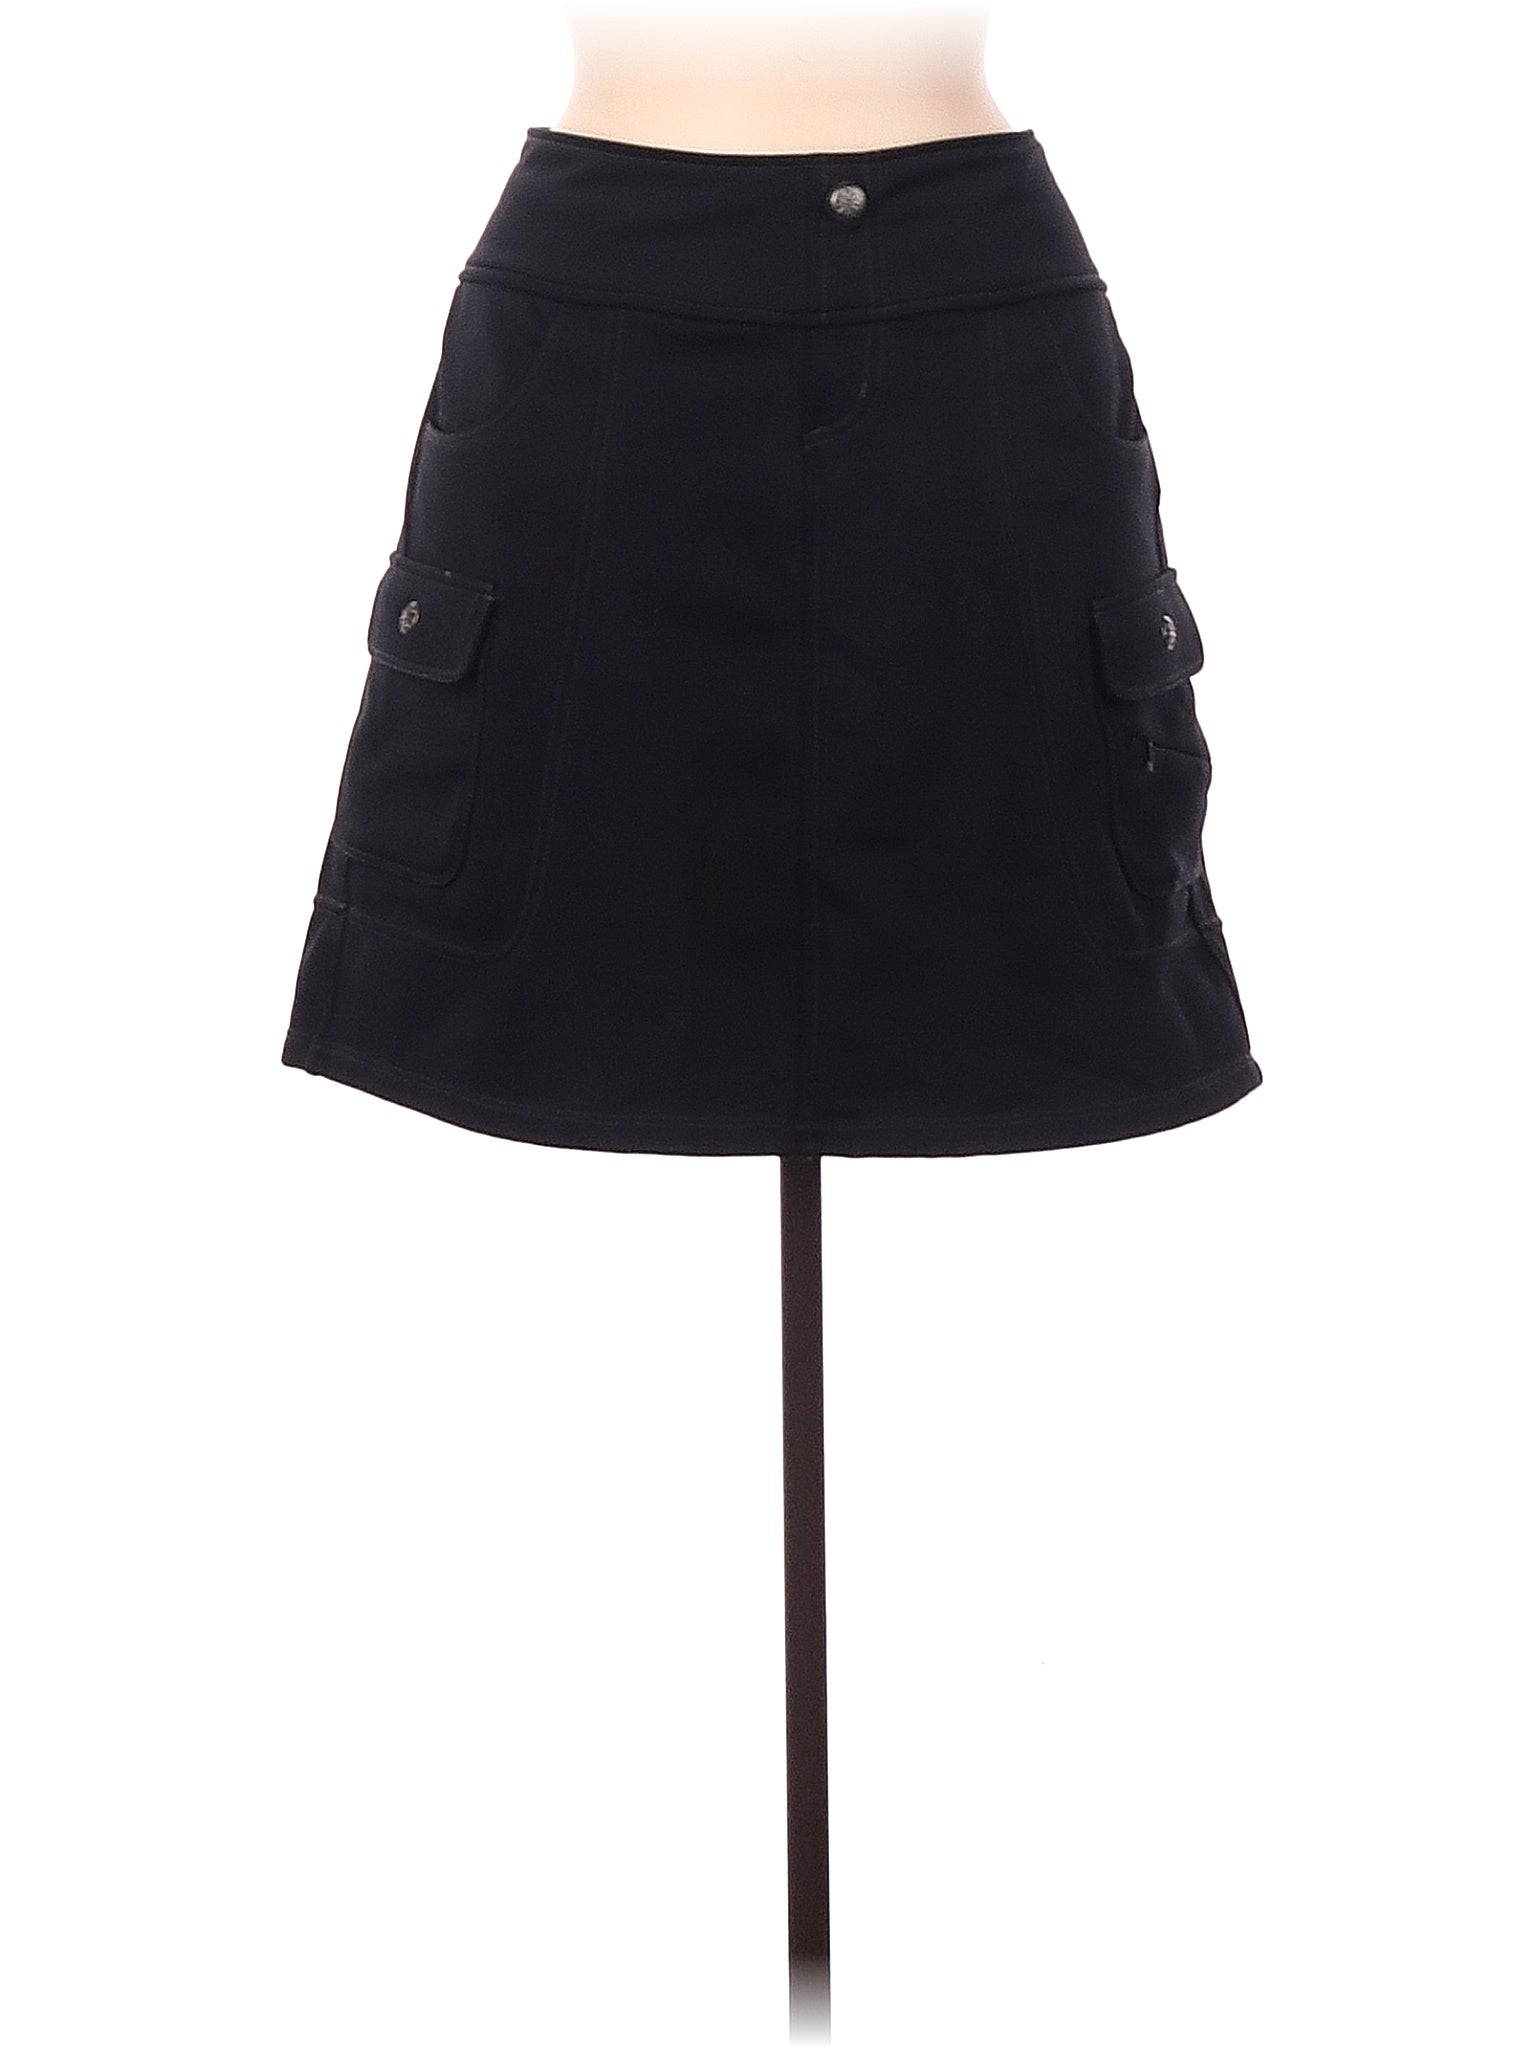 Active Skirt size - M T